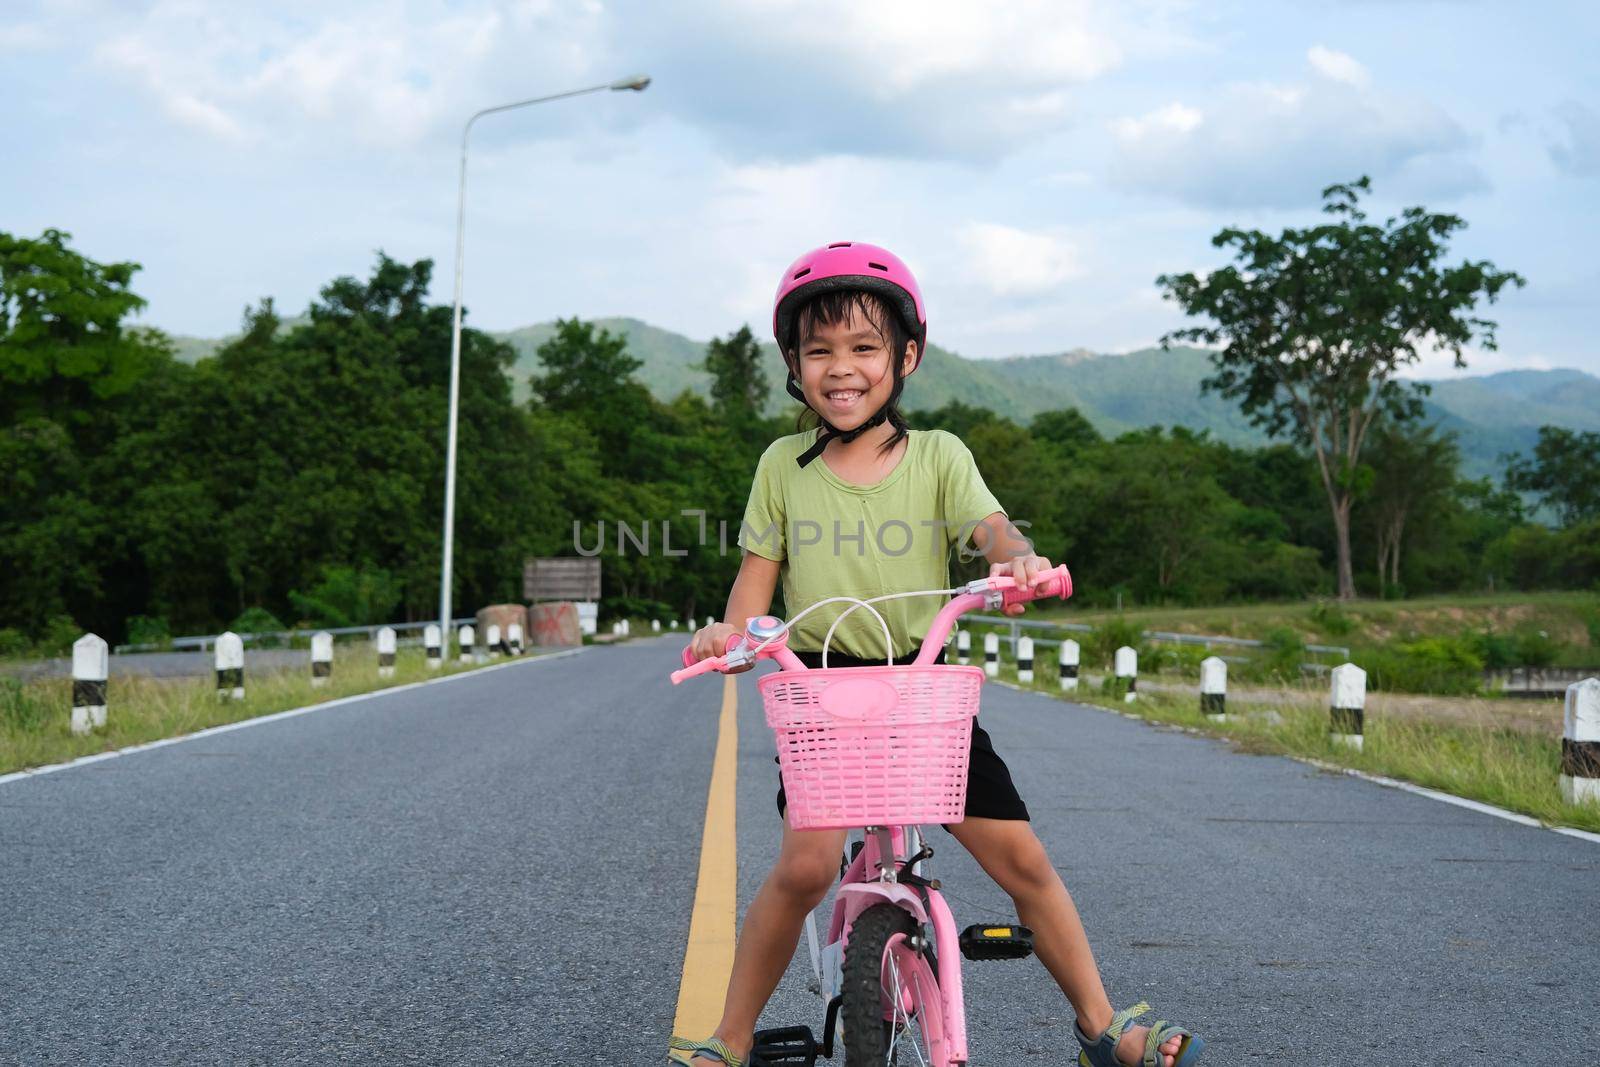 Cute little girl in a helmet riding a bicycle on an asphalt road in summer. Happy little girl riding a bicycle outdoors. Healthy Summer Activities for Kids by TEERASAK